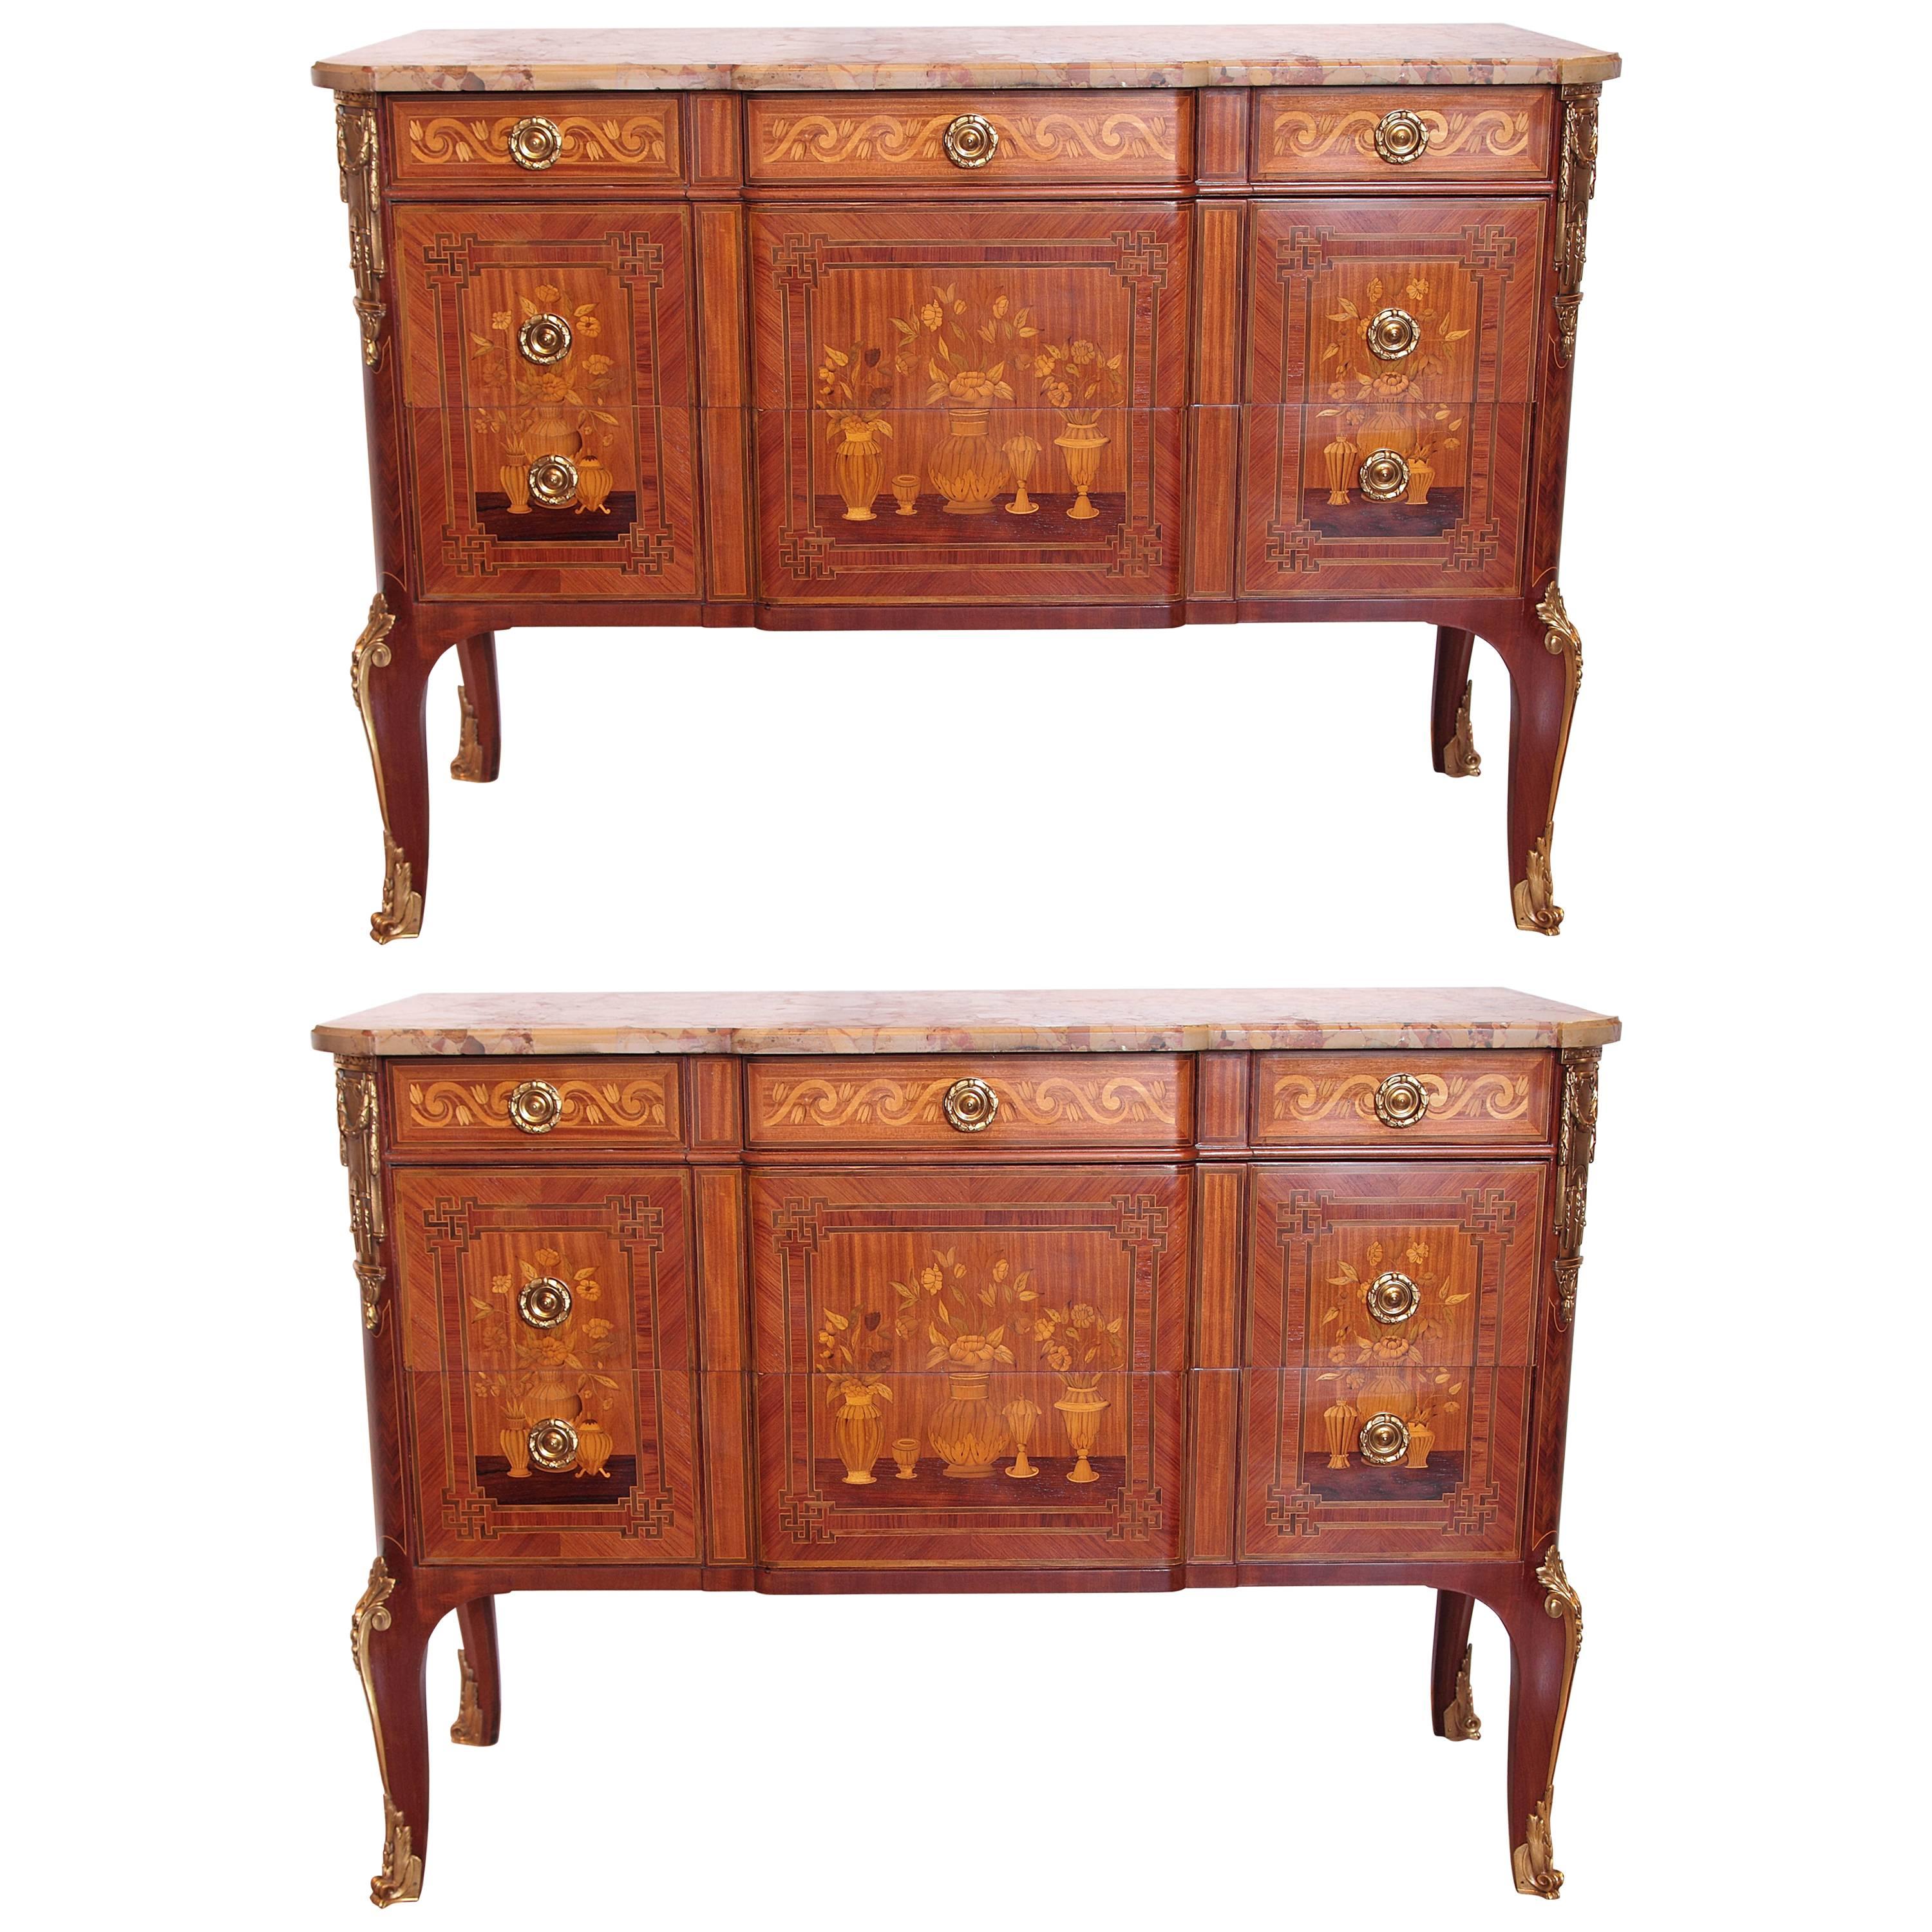 Pair of Late 19th Century French Louis XV Marquetry Commodes